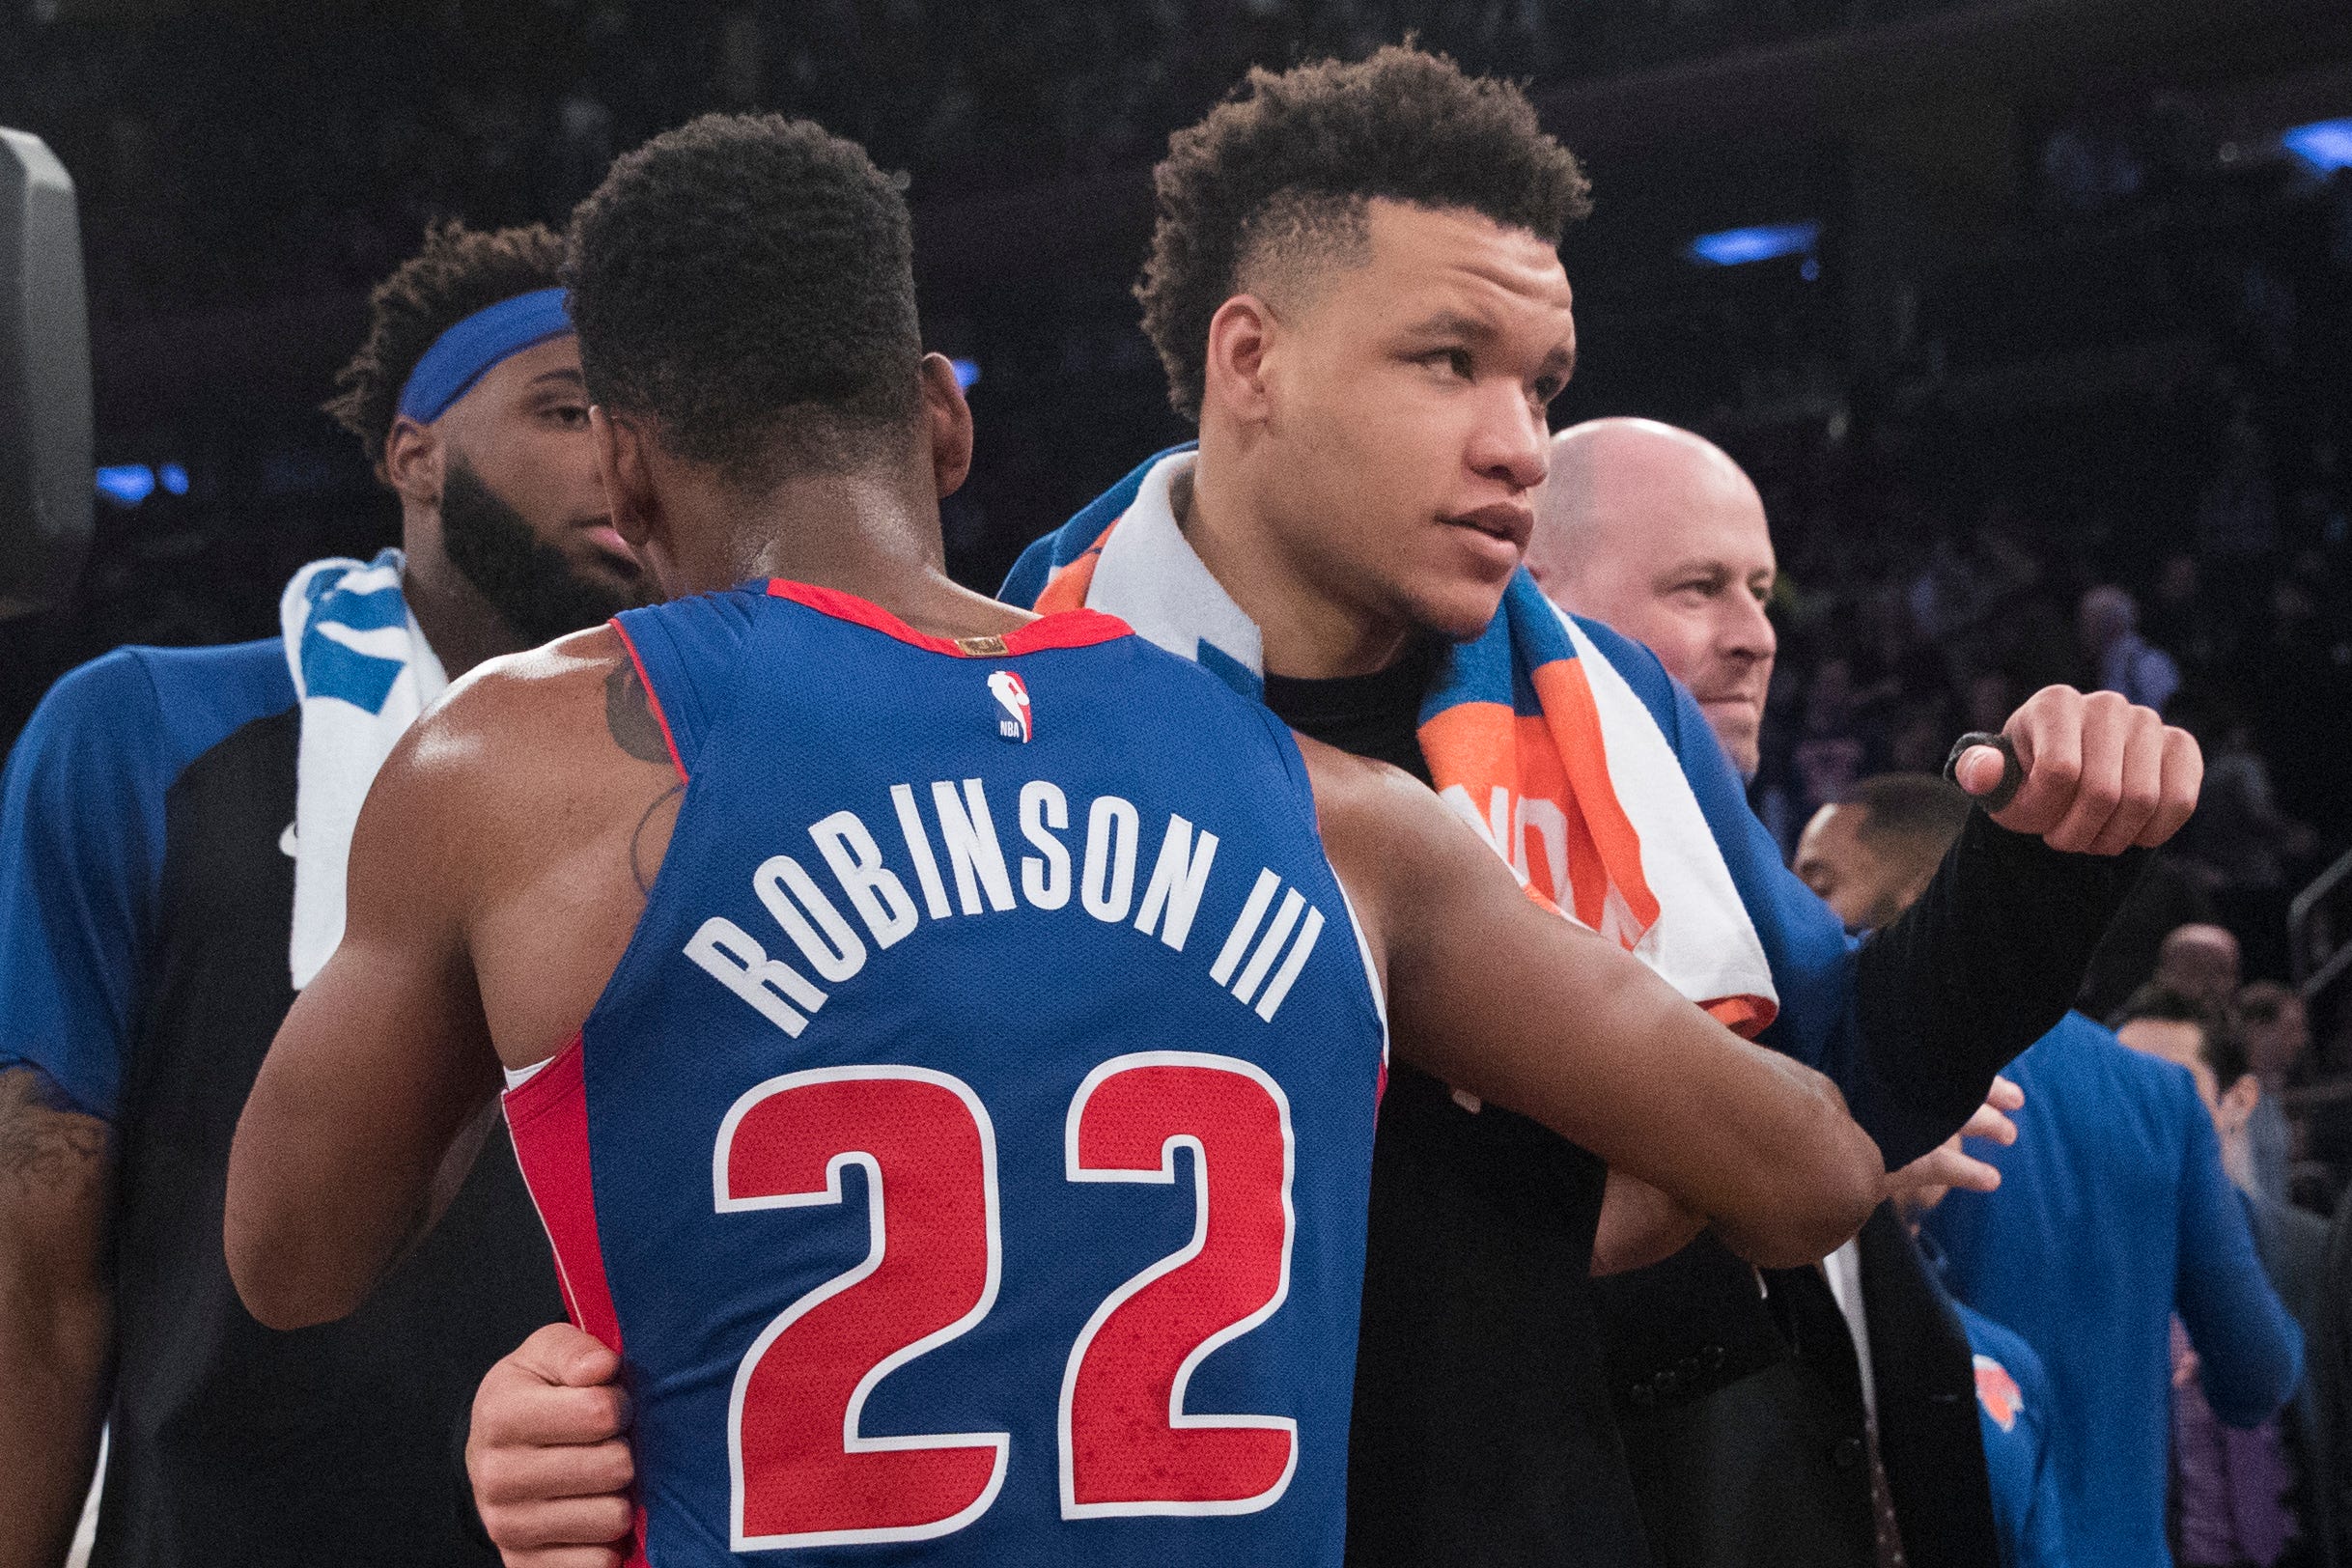 Detroit Pistons guard Glenn Robinson III (22) embraces New York Knicks forward Kevin Knox at the end of the game.